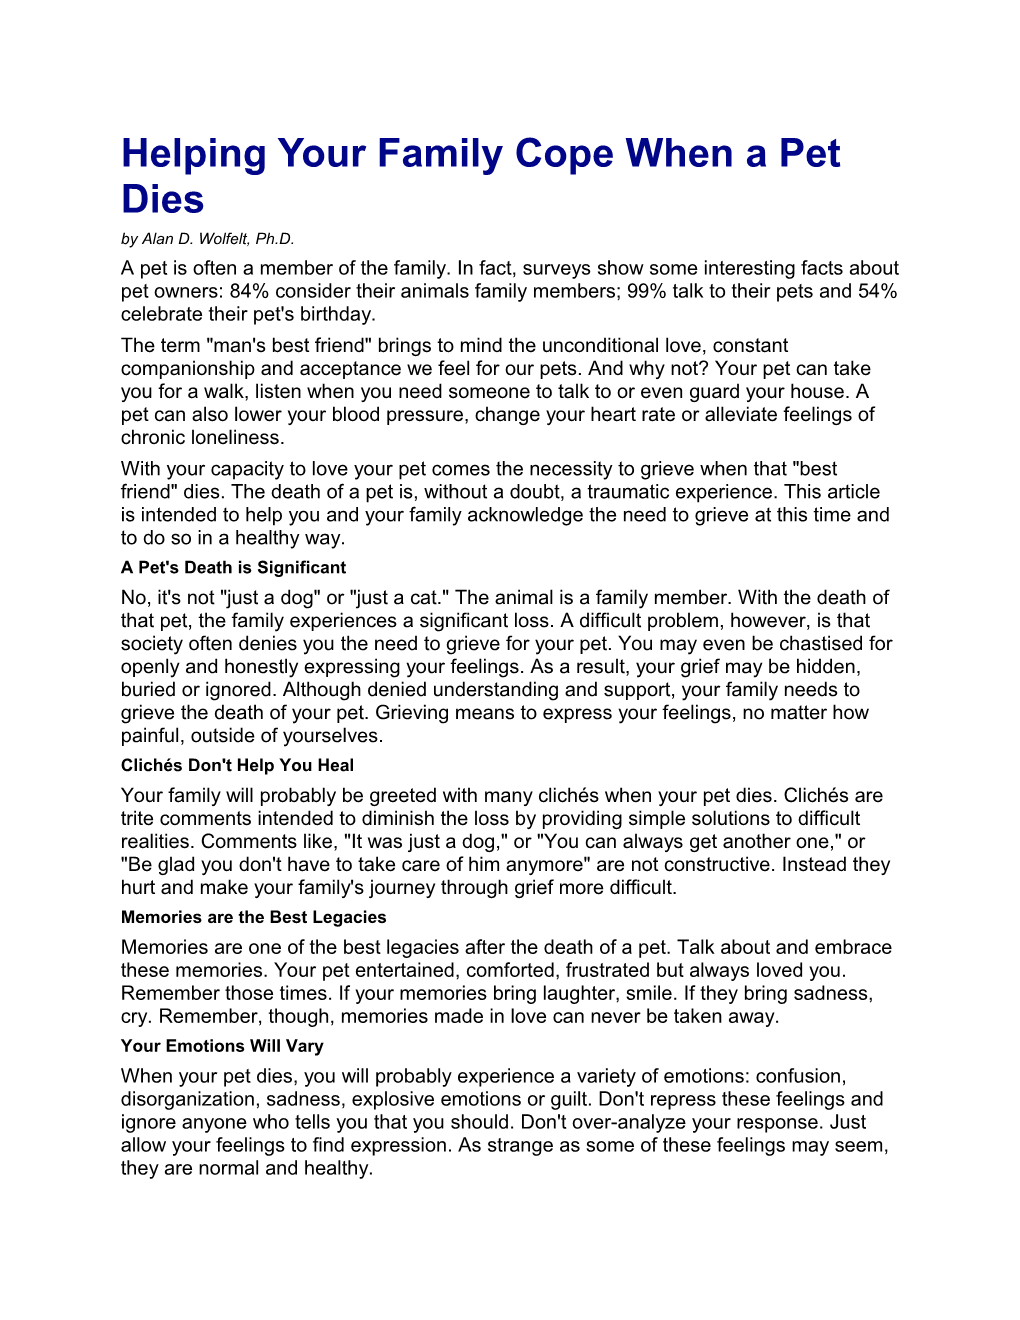 Helping Your Family Cope When a Pet Dies